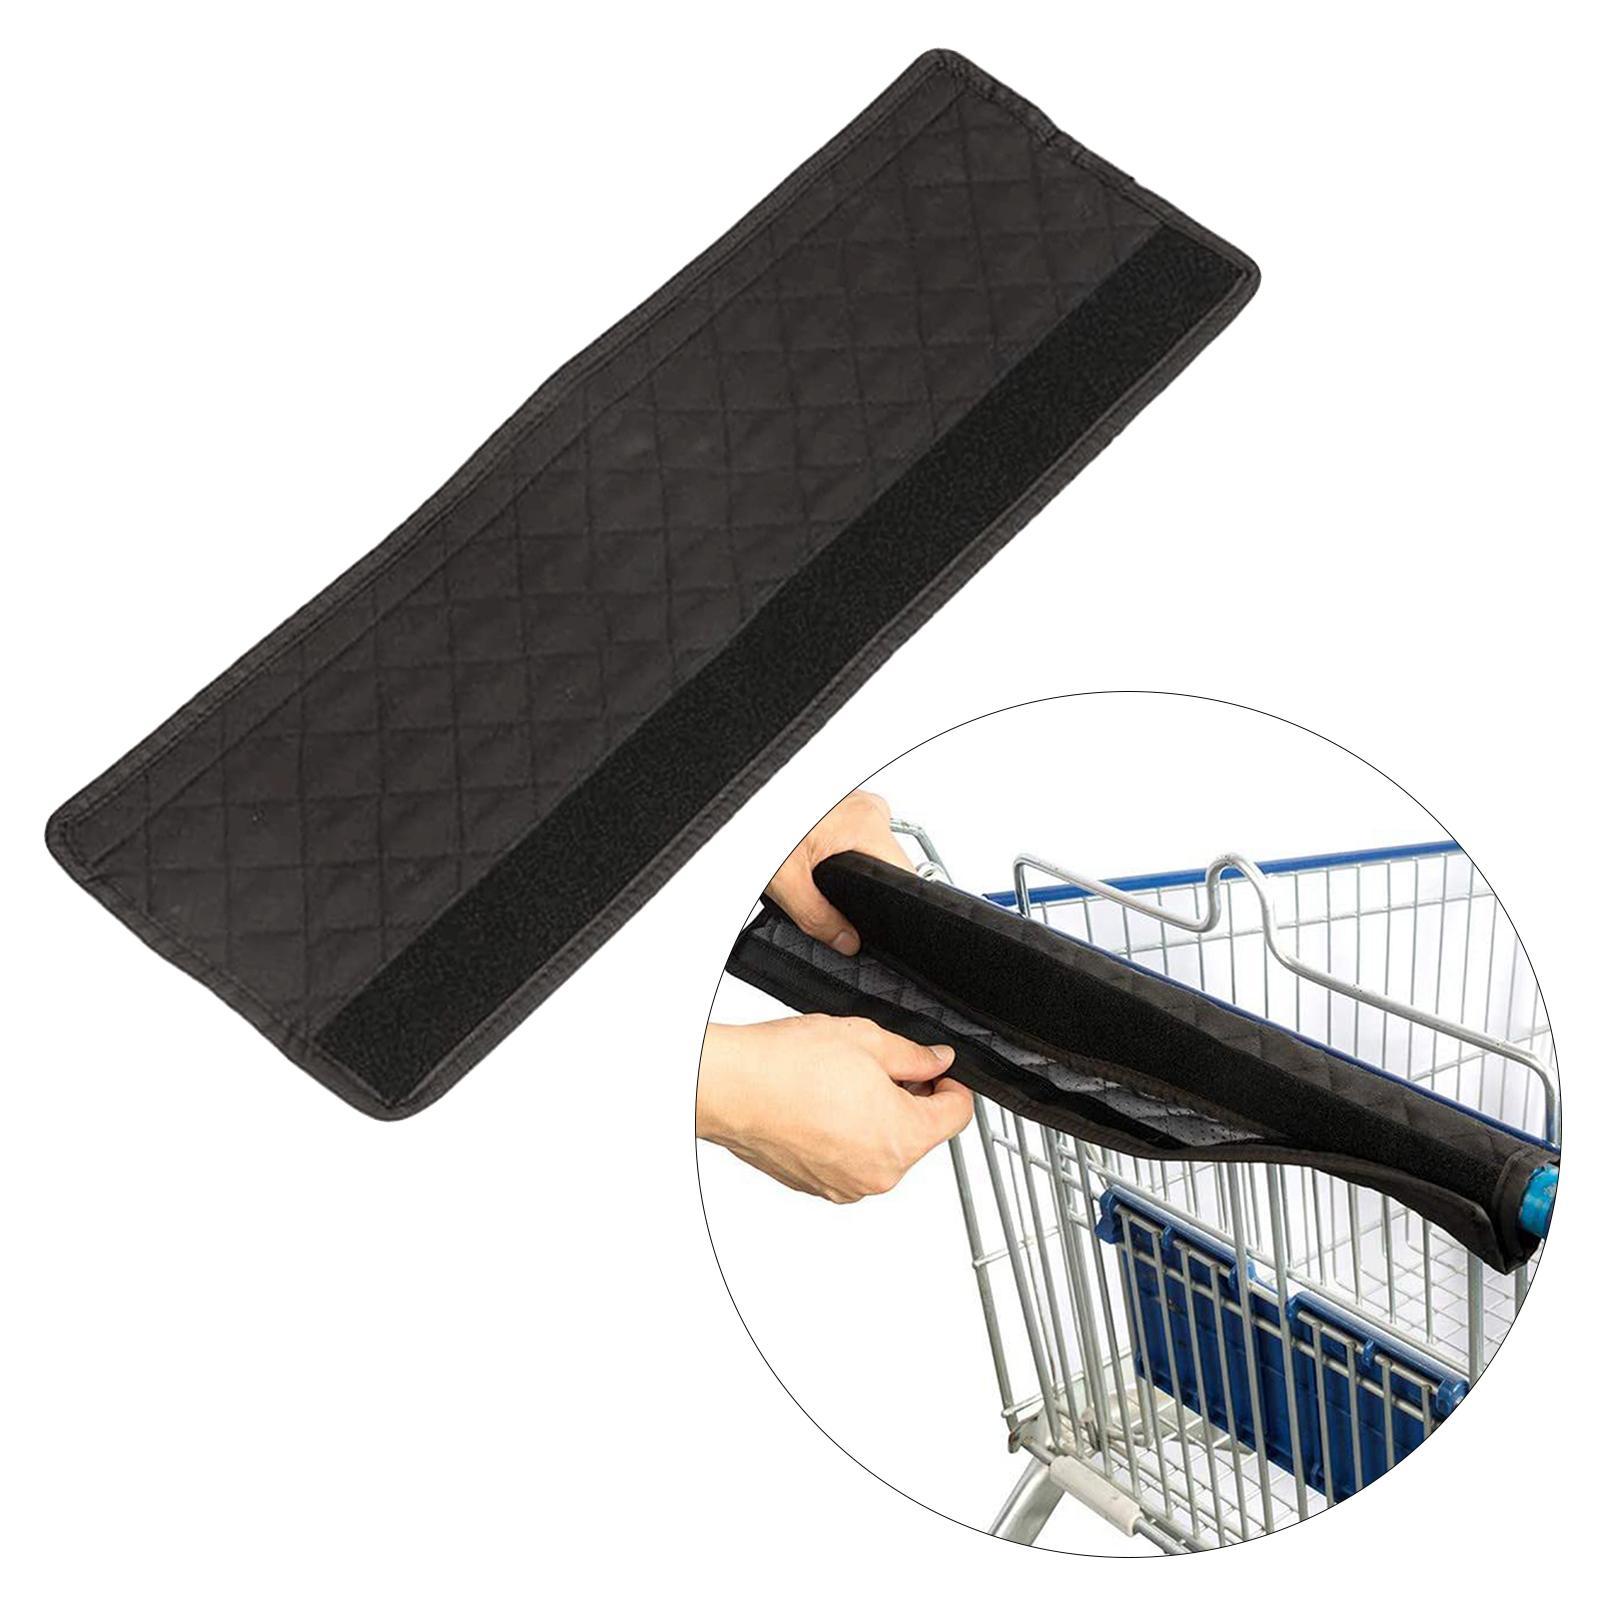 Shopping Cart Arm Cover Washable Wear Resistance Handlebar Gloves Protector